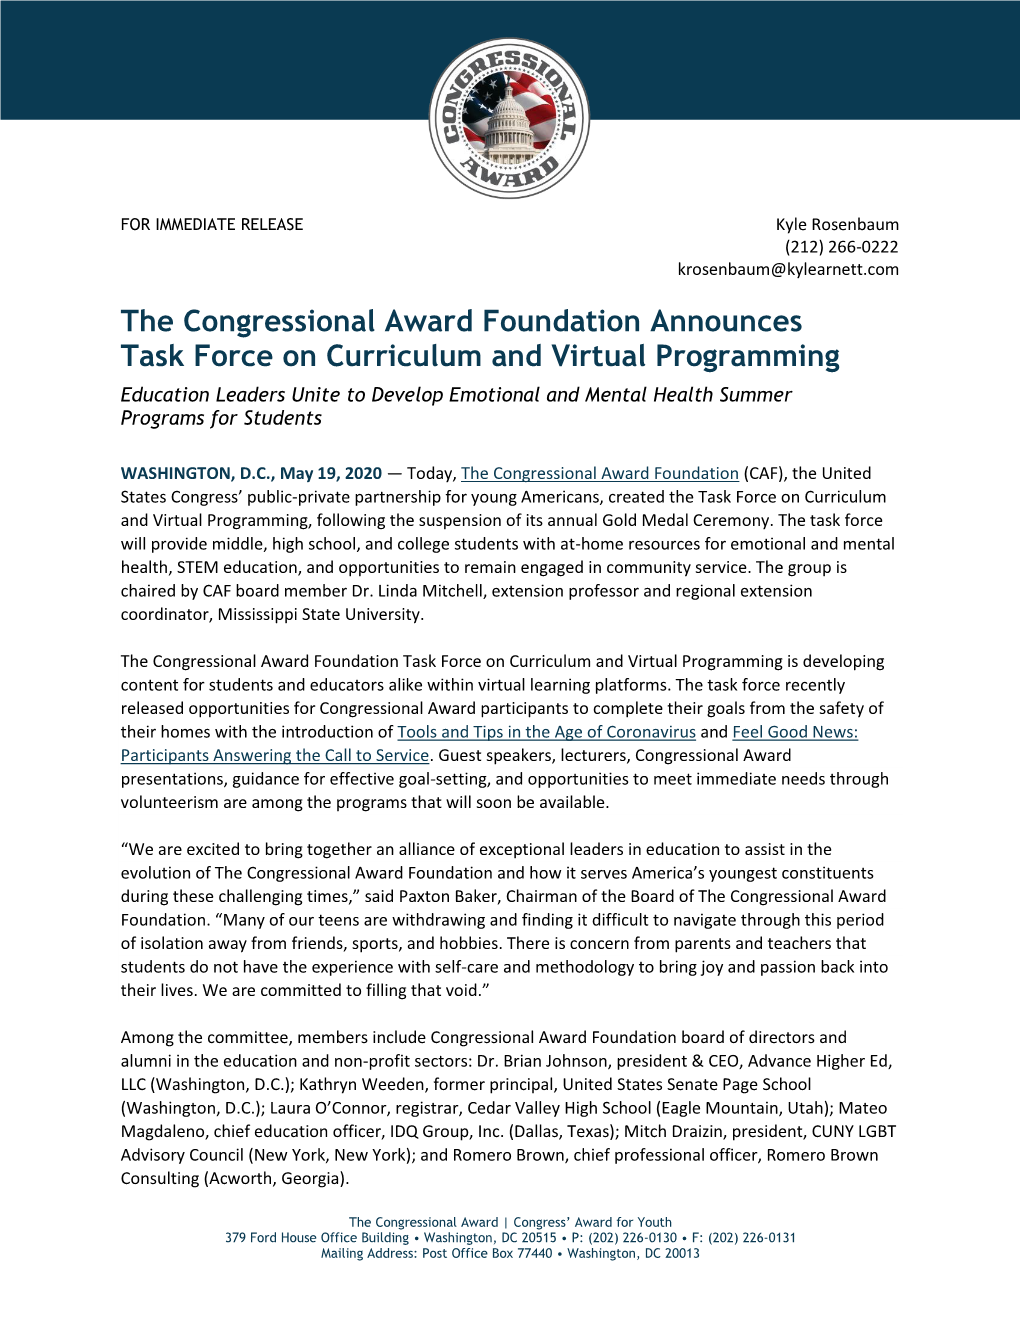 The Congressional Award Foundation Announces Task Force On